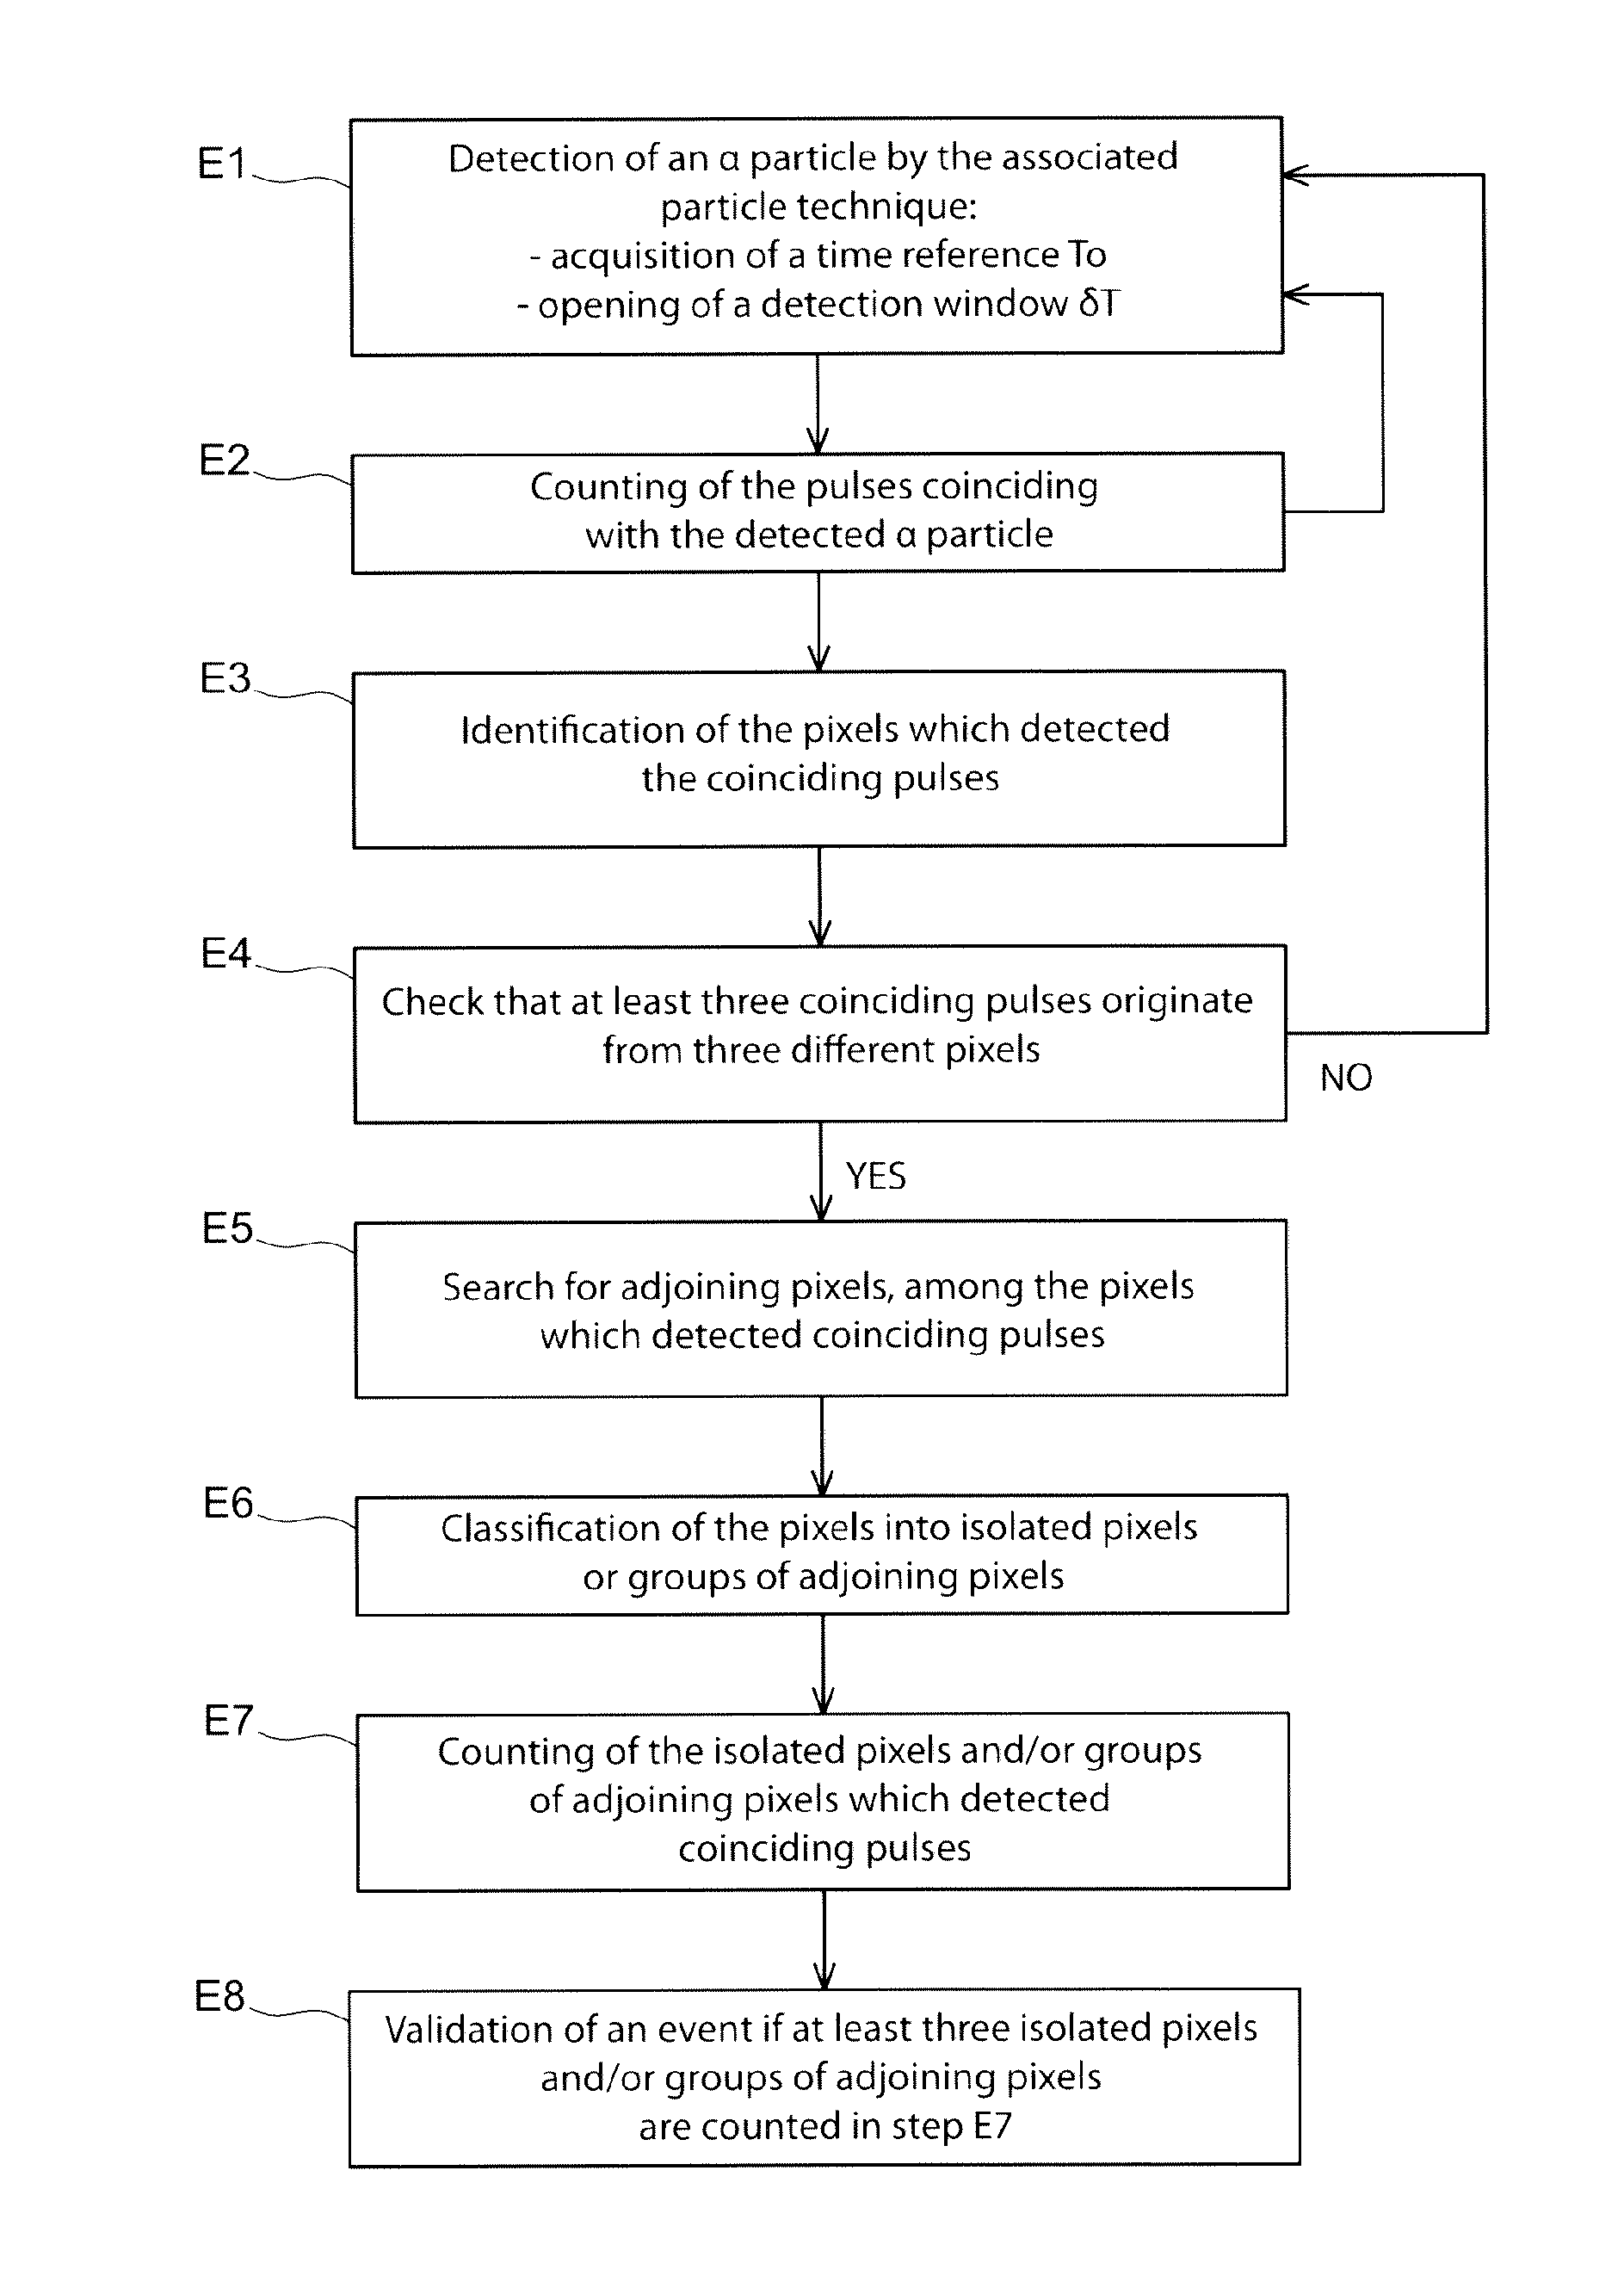 Method for detecting nuclear material by means of neutron interrogation, and related detection system